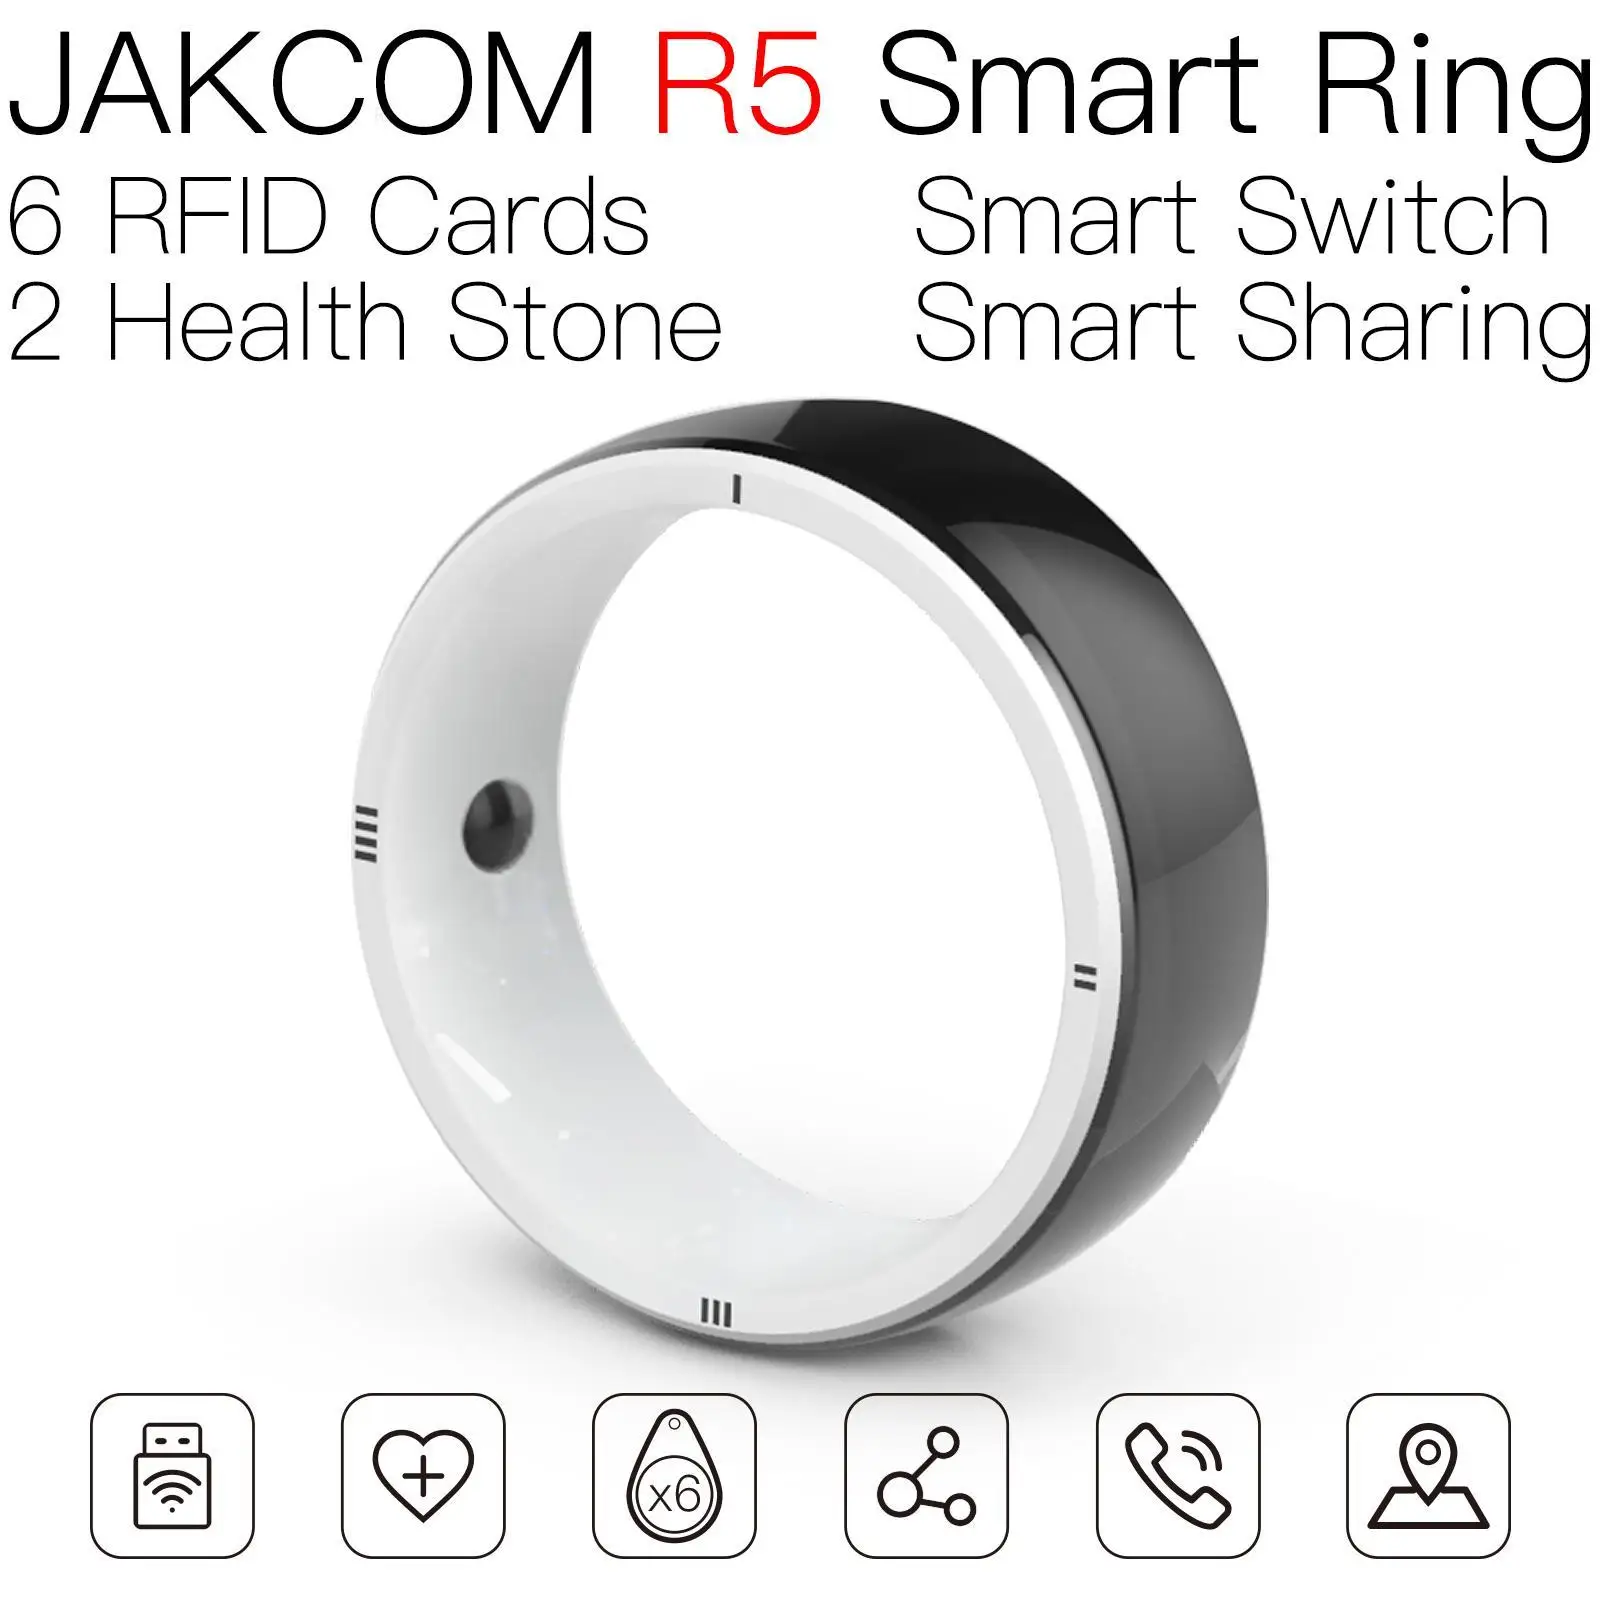 JAKCOM R5 Smart Ring Newer than watches for mans women free shipping smart tv headset facebook 6 display hanging